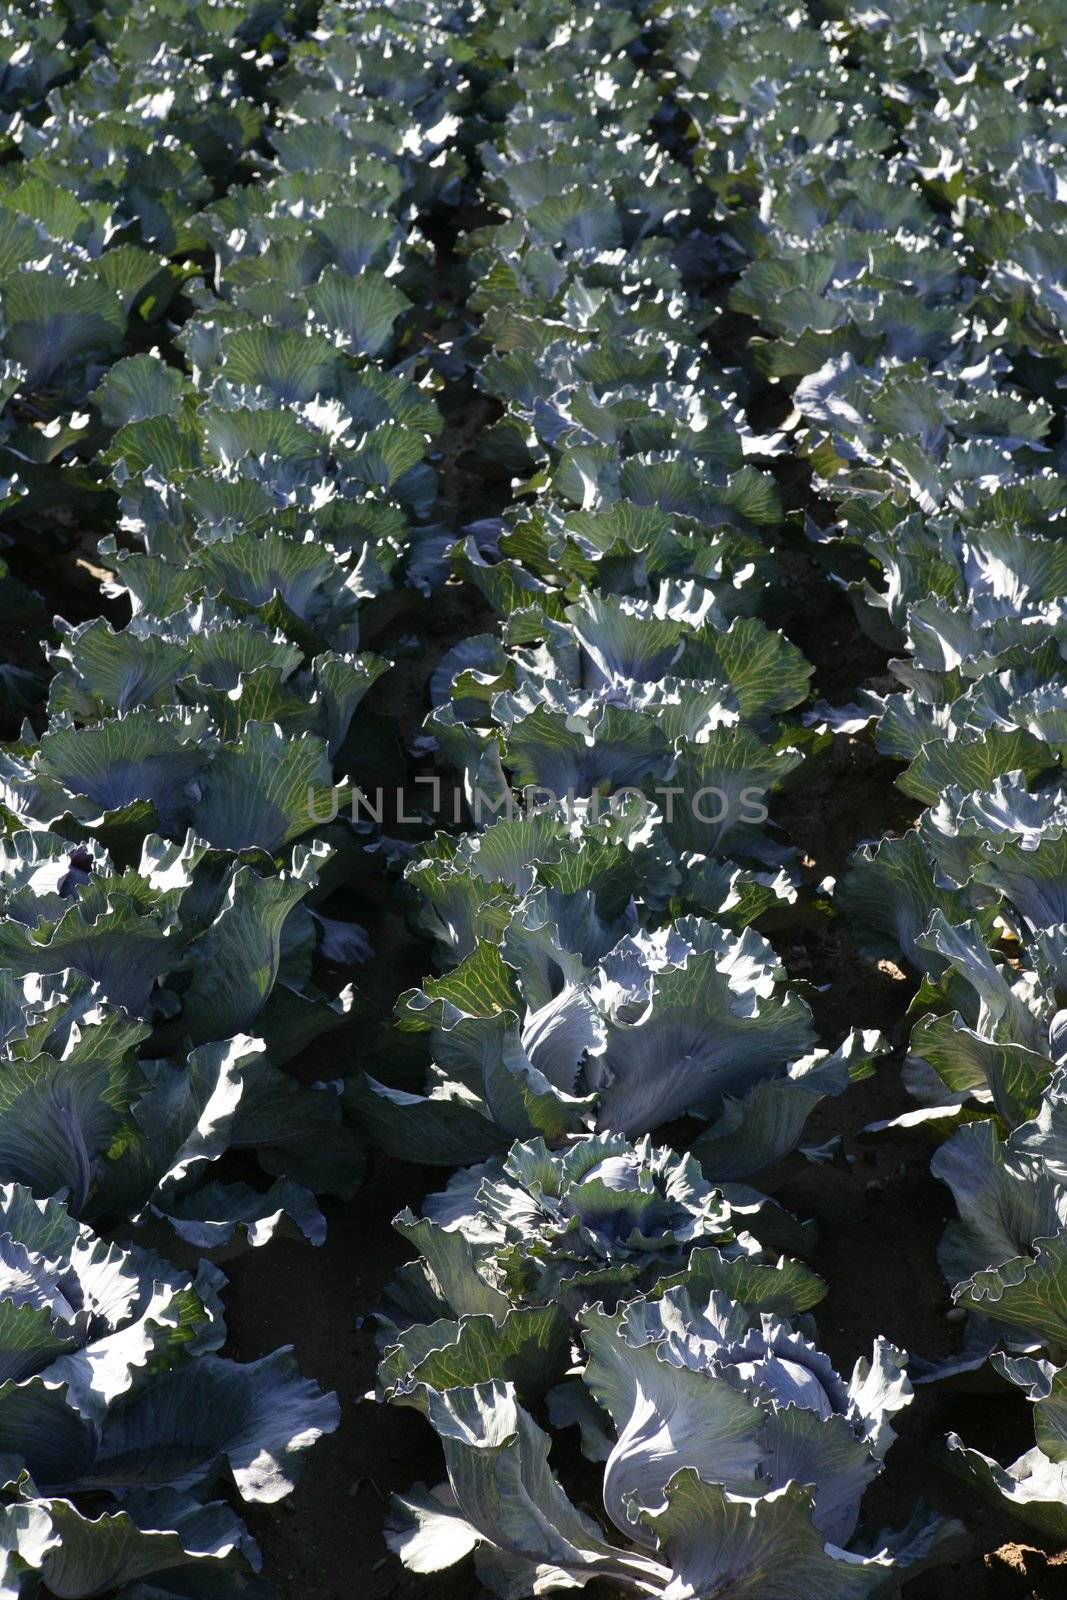 Agriculture in Spain, cabbage cultivation by lunamarina